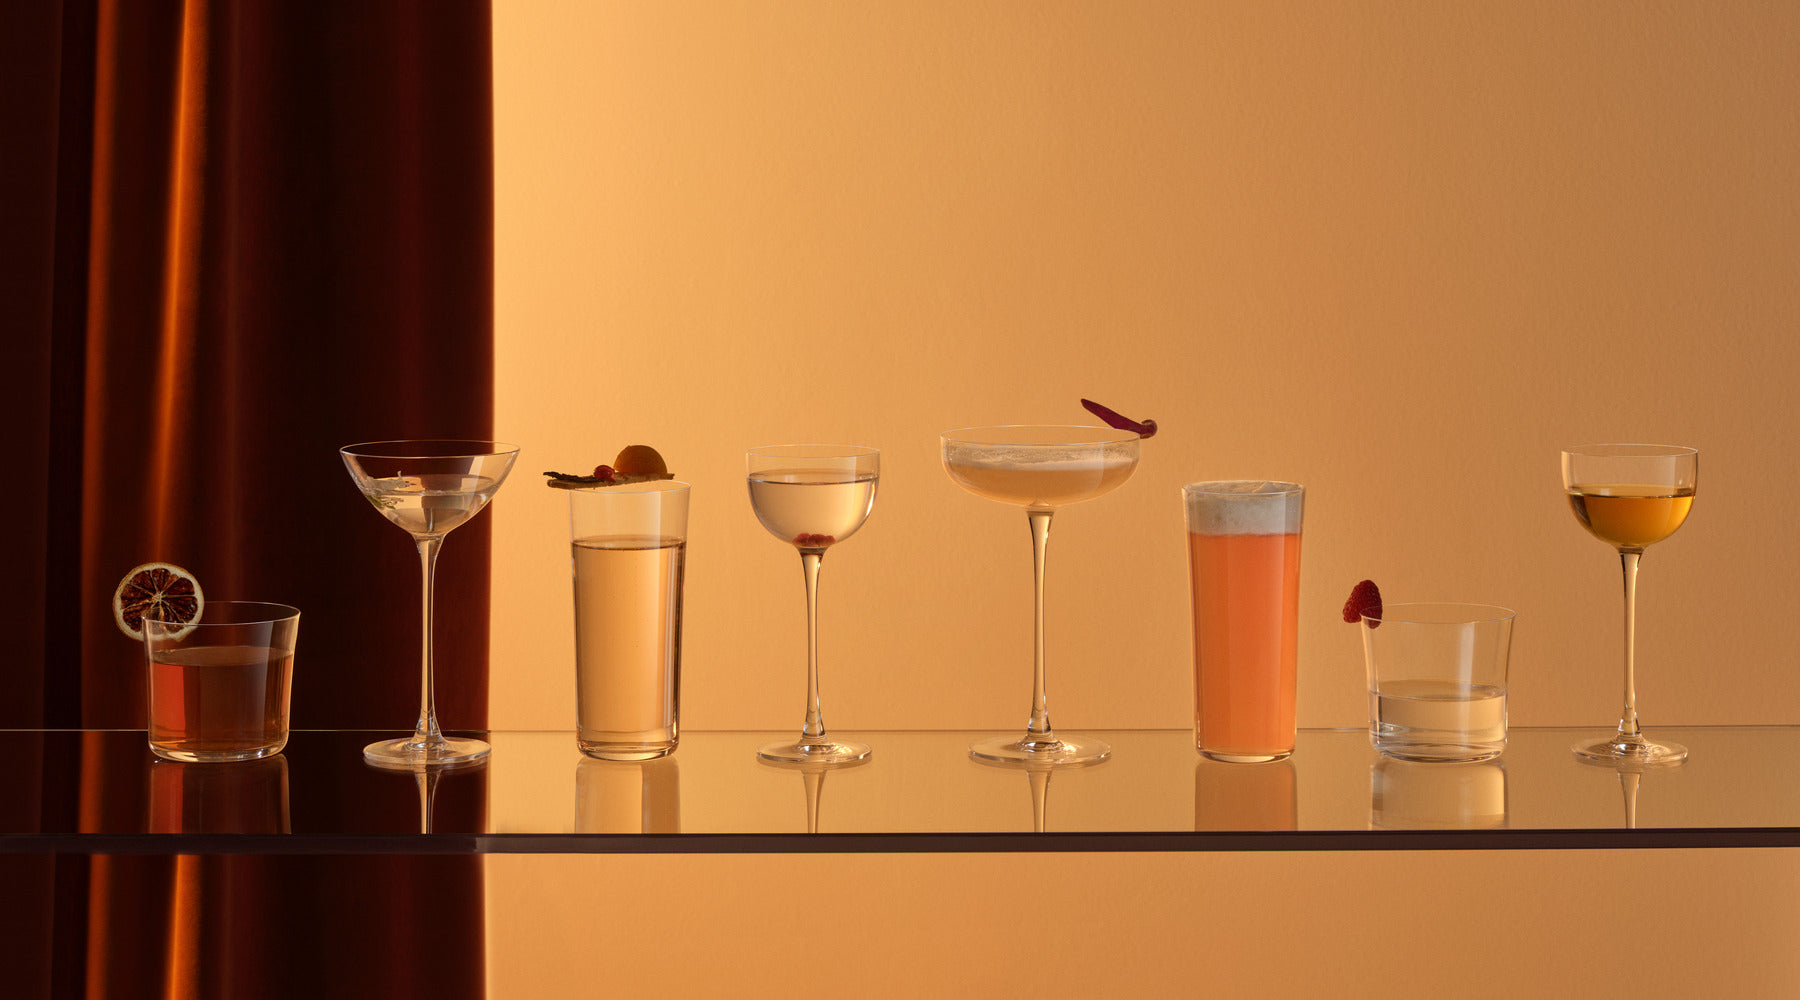 NUDE Savag cocktail collection, a coupe glass, coupetini glass, pony glass, highball, water and lowball glass presented in an orange scenery and orange toned cocktails